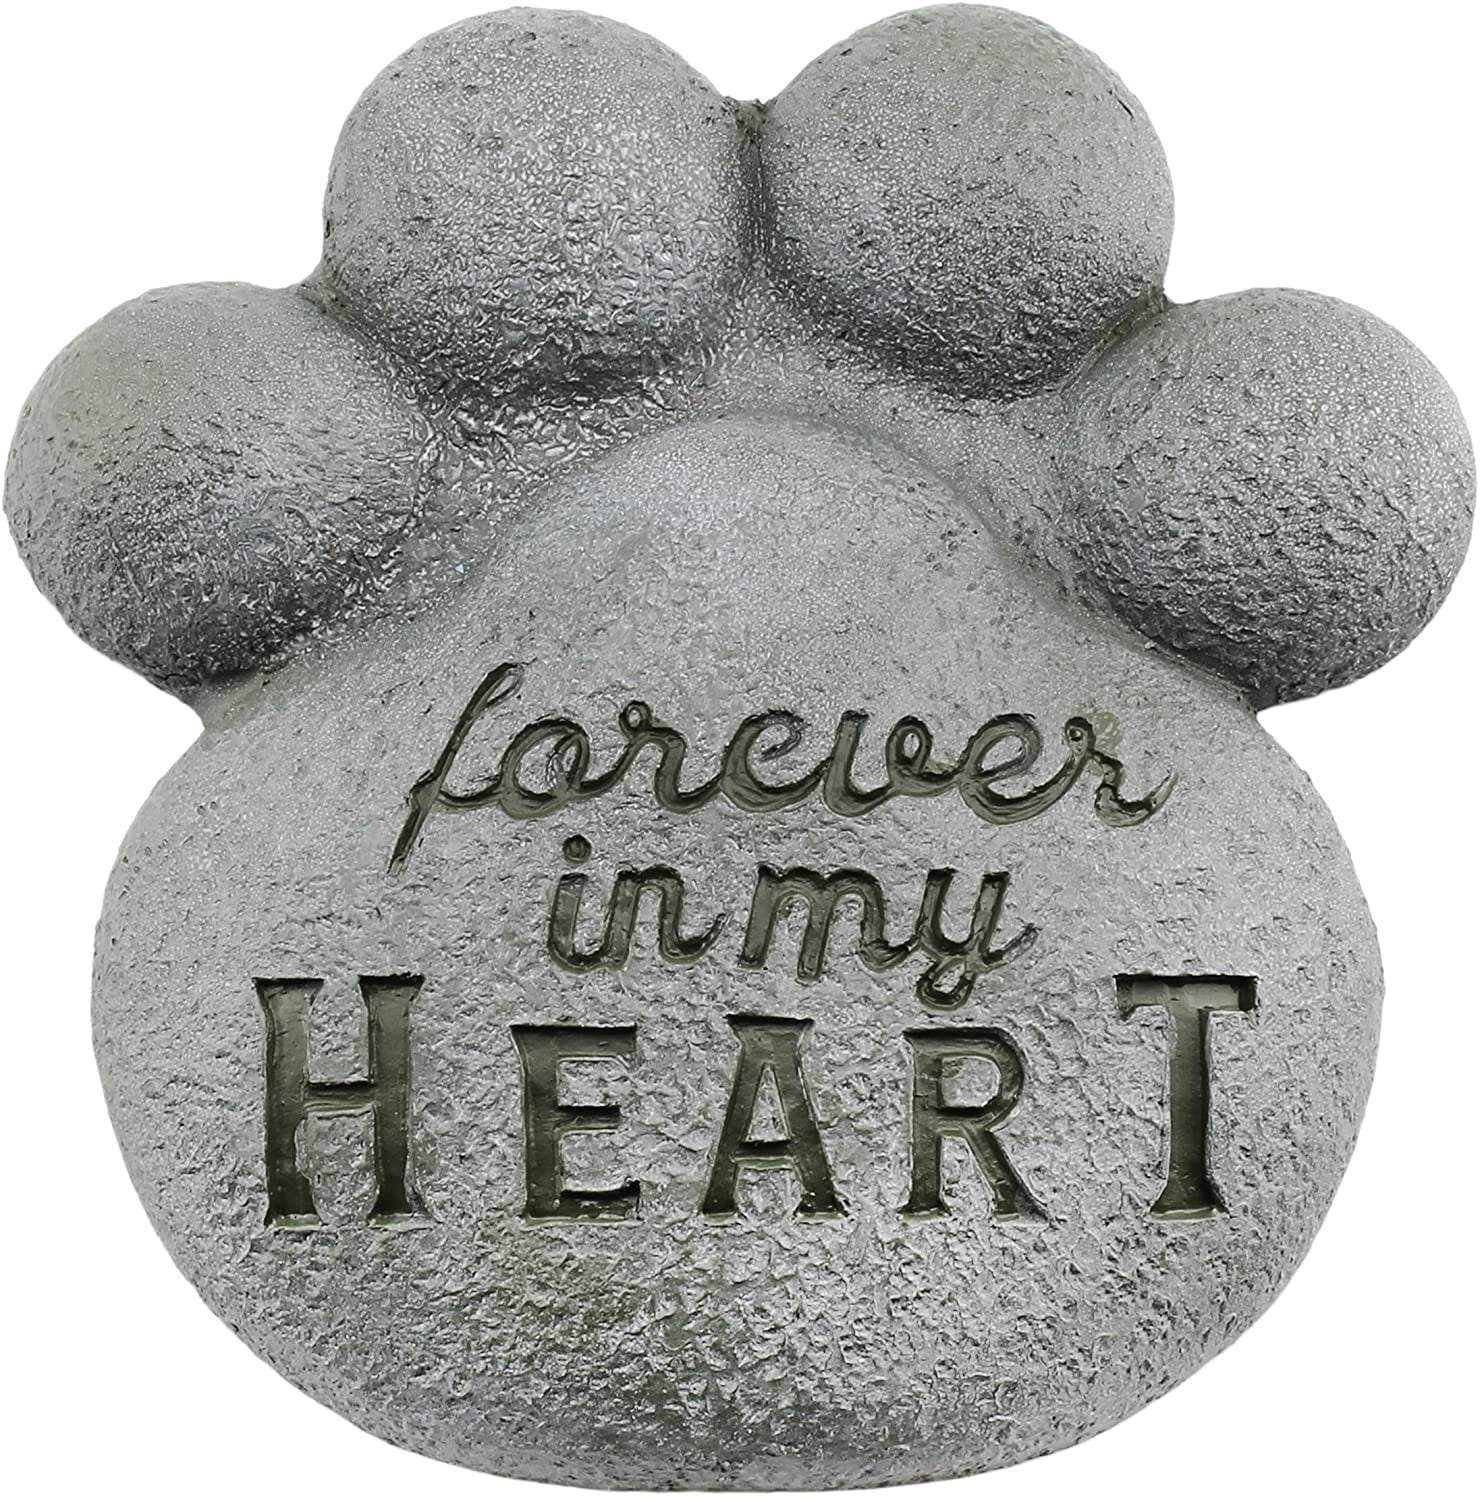 ,9.6x9.5 Heart Shaped Pet Memorial Stone Grave Marker for Dog or Cat Pet Dog Garden Stone for Outdoor Backyard Patio or Lawn,Syampathy Pet Dog Loss Gifts Paw Print Stone